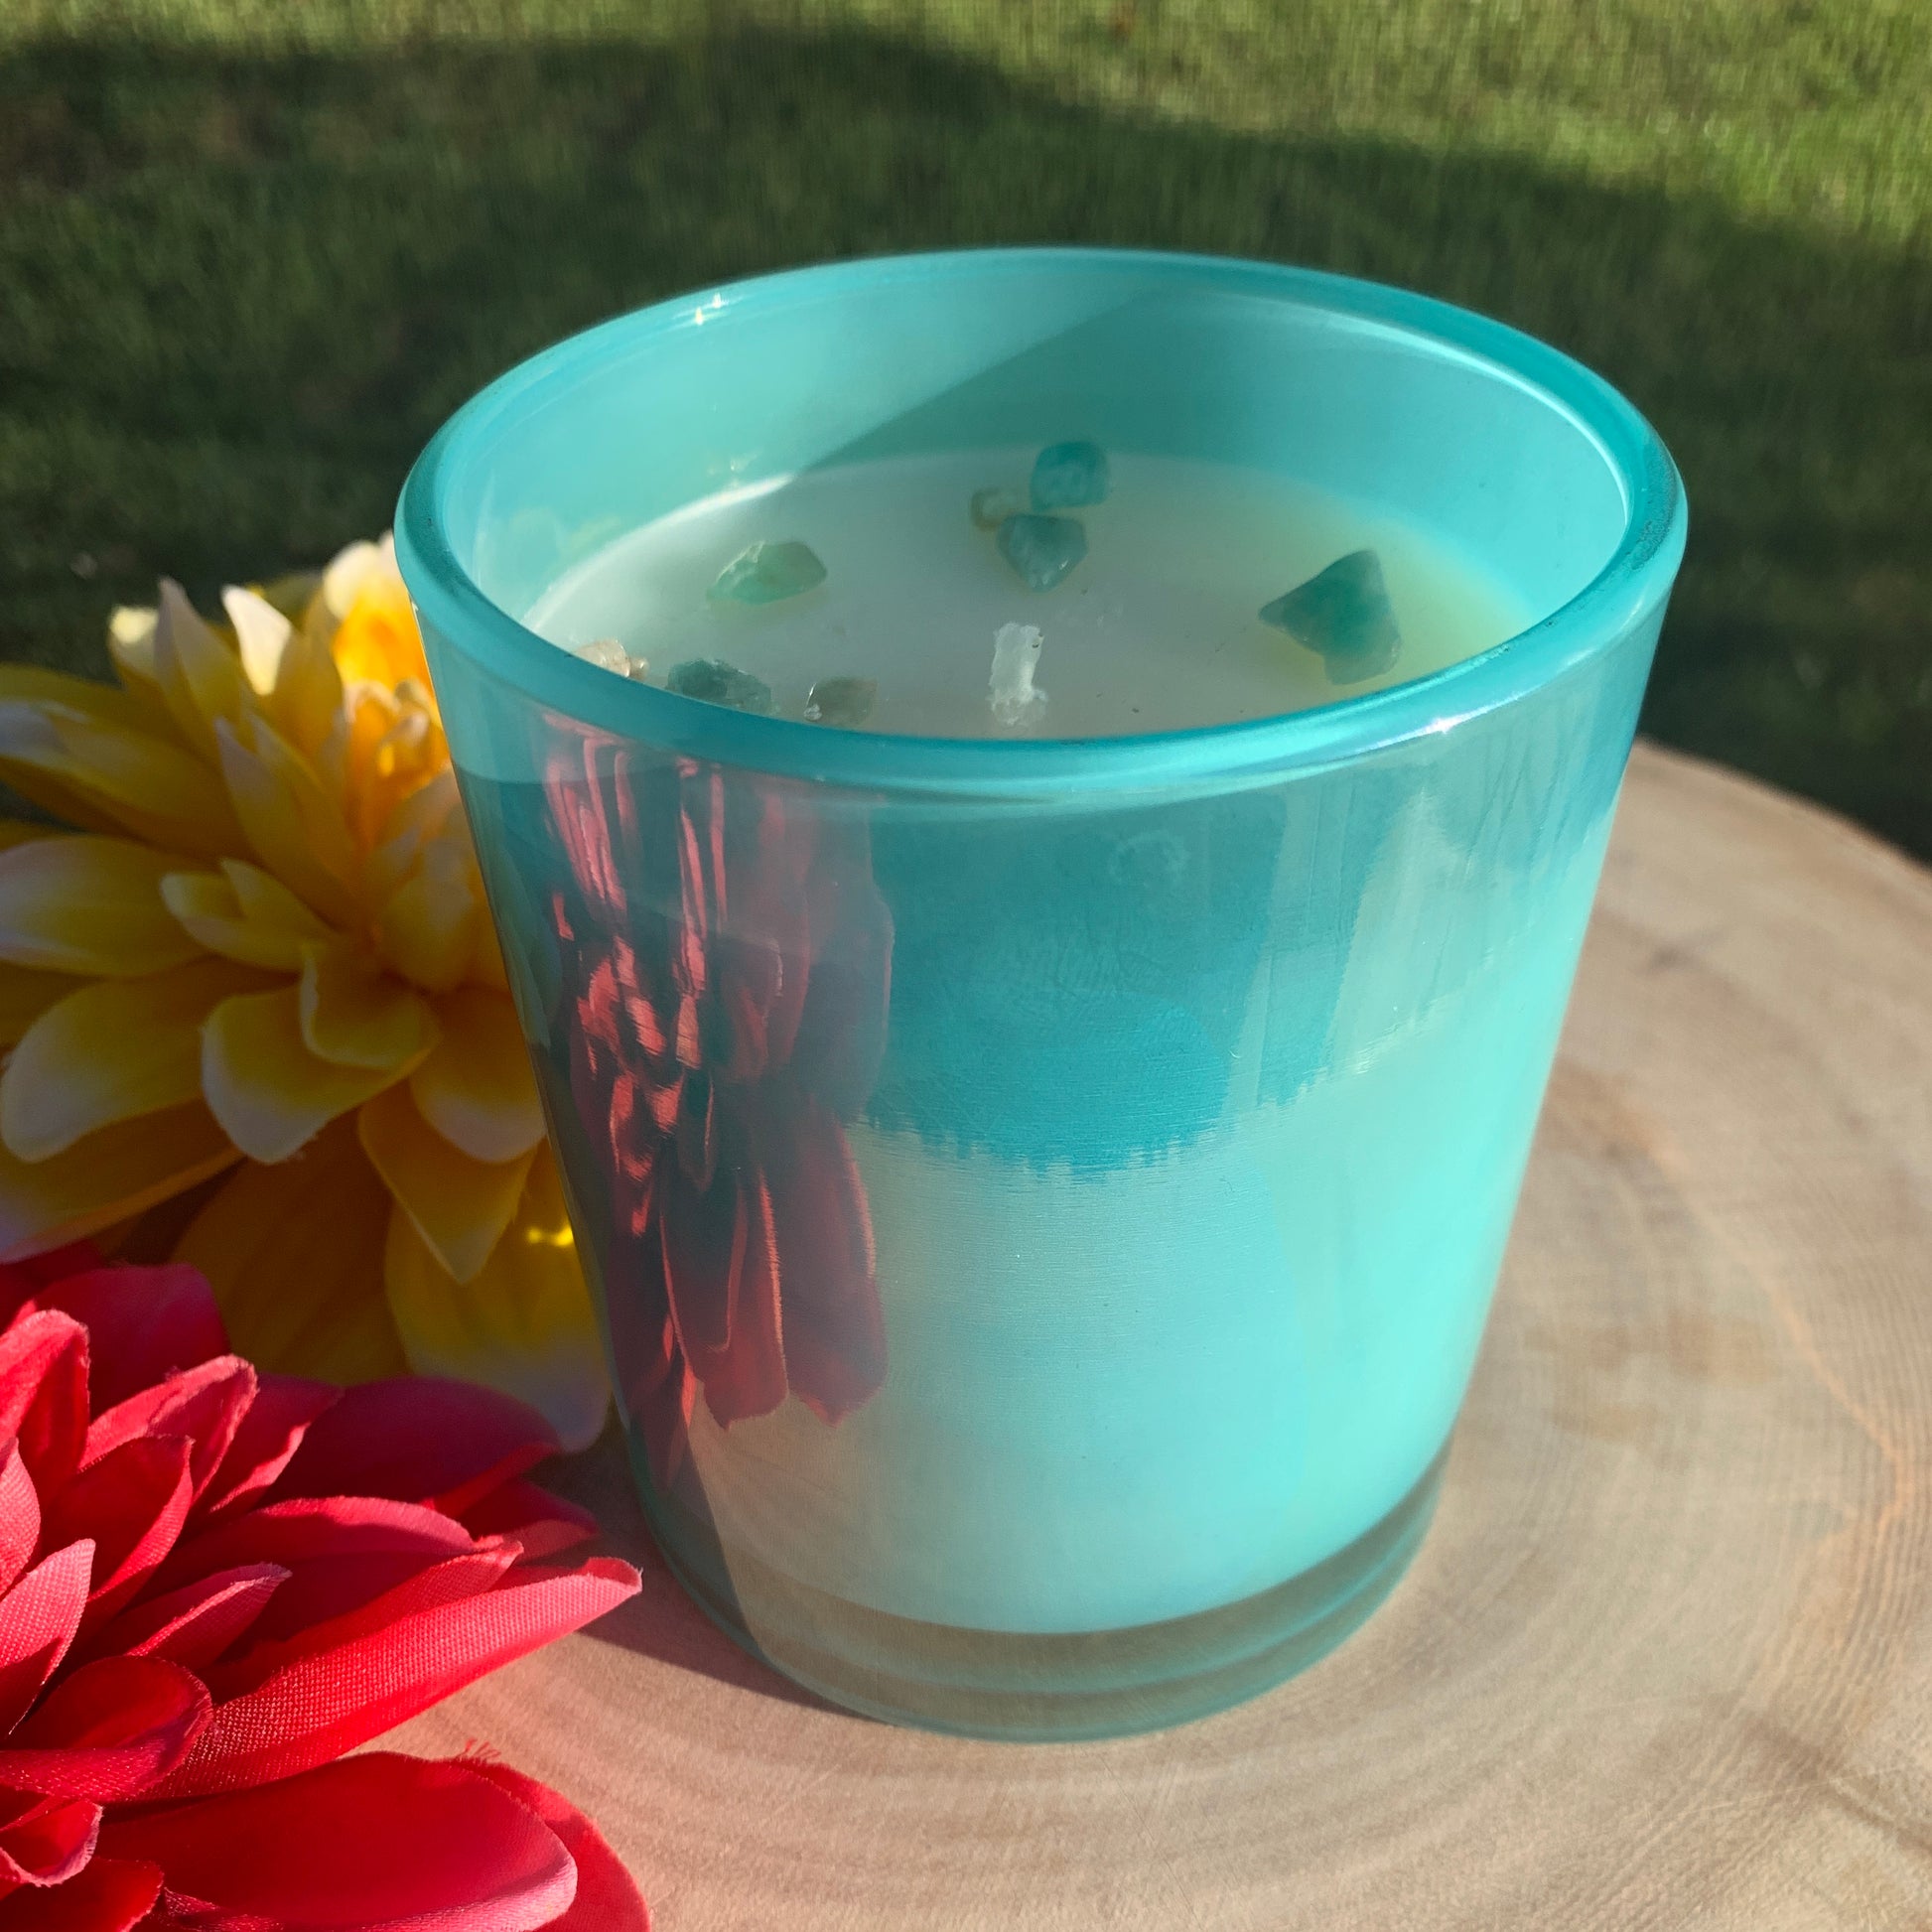 🕯️This photo displays the aqua-colored mermaid jar representing mysticism, intuition and connection to the divine feminine with amazonite, known as the stone of courage and truth that enhances communication and expressions of the heart.🕯️